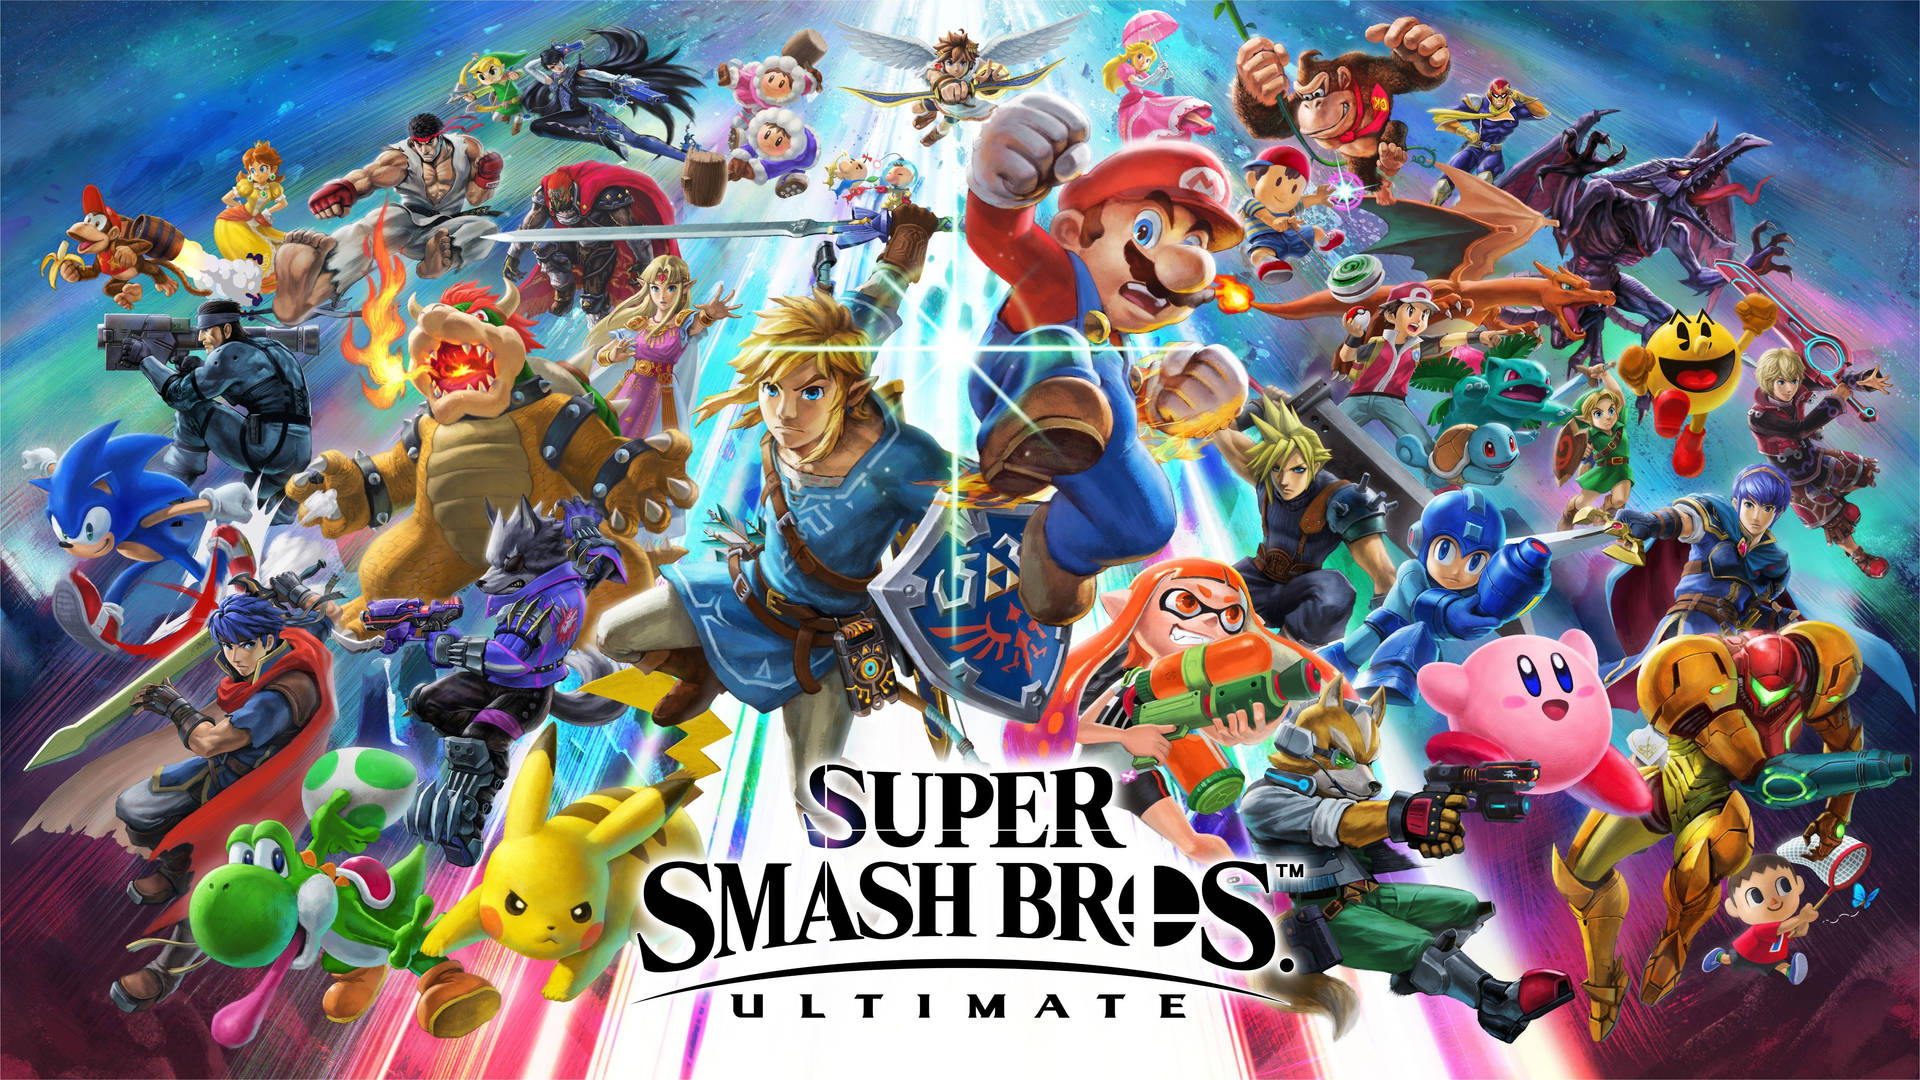 Smash Bros Ultimate Action Poster Background